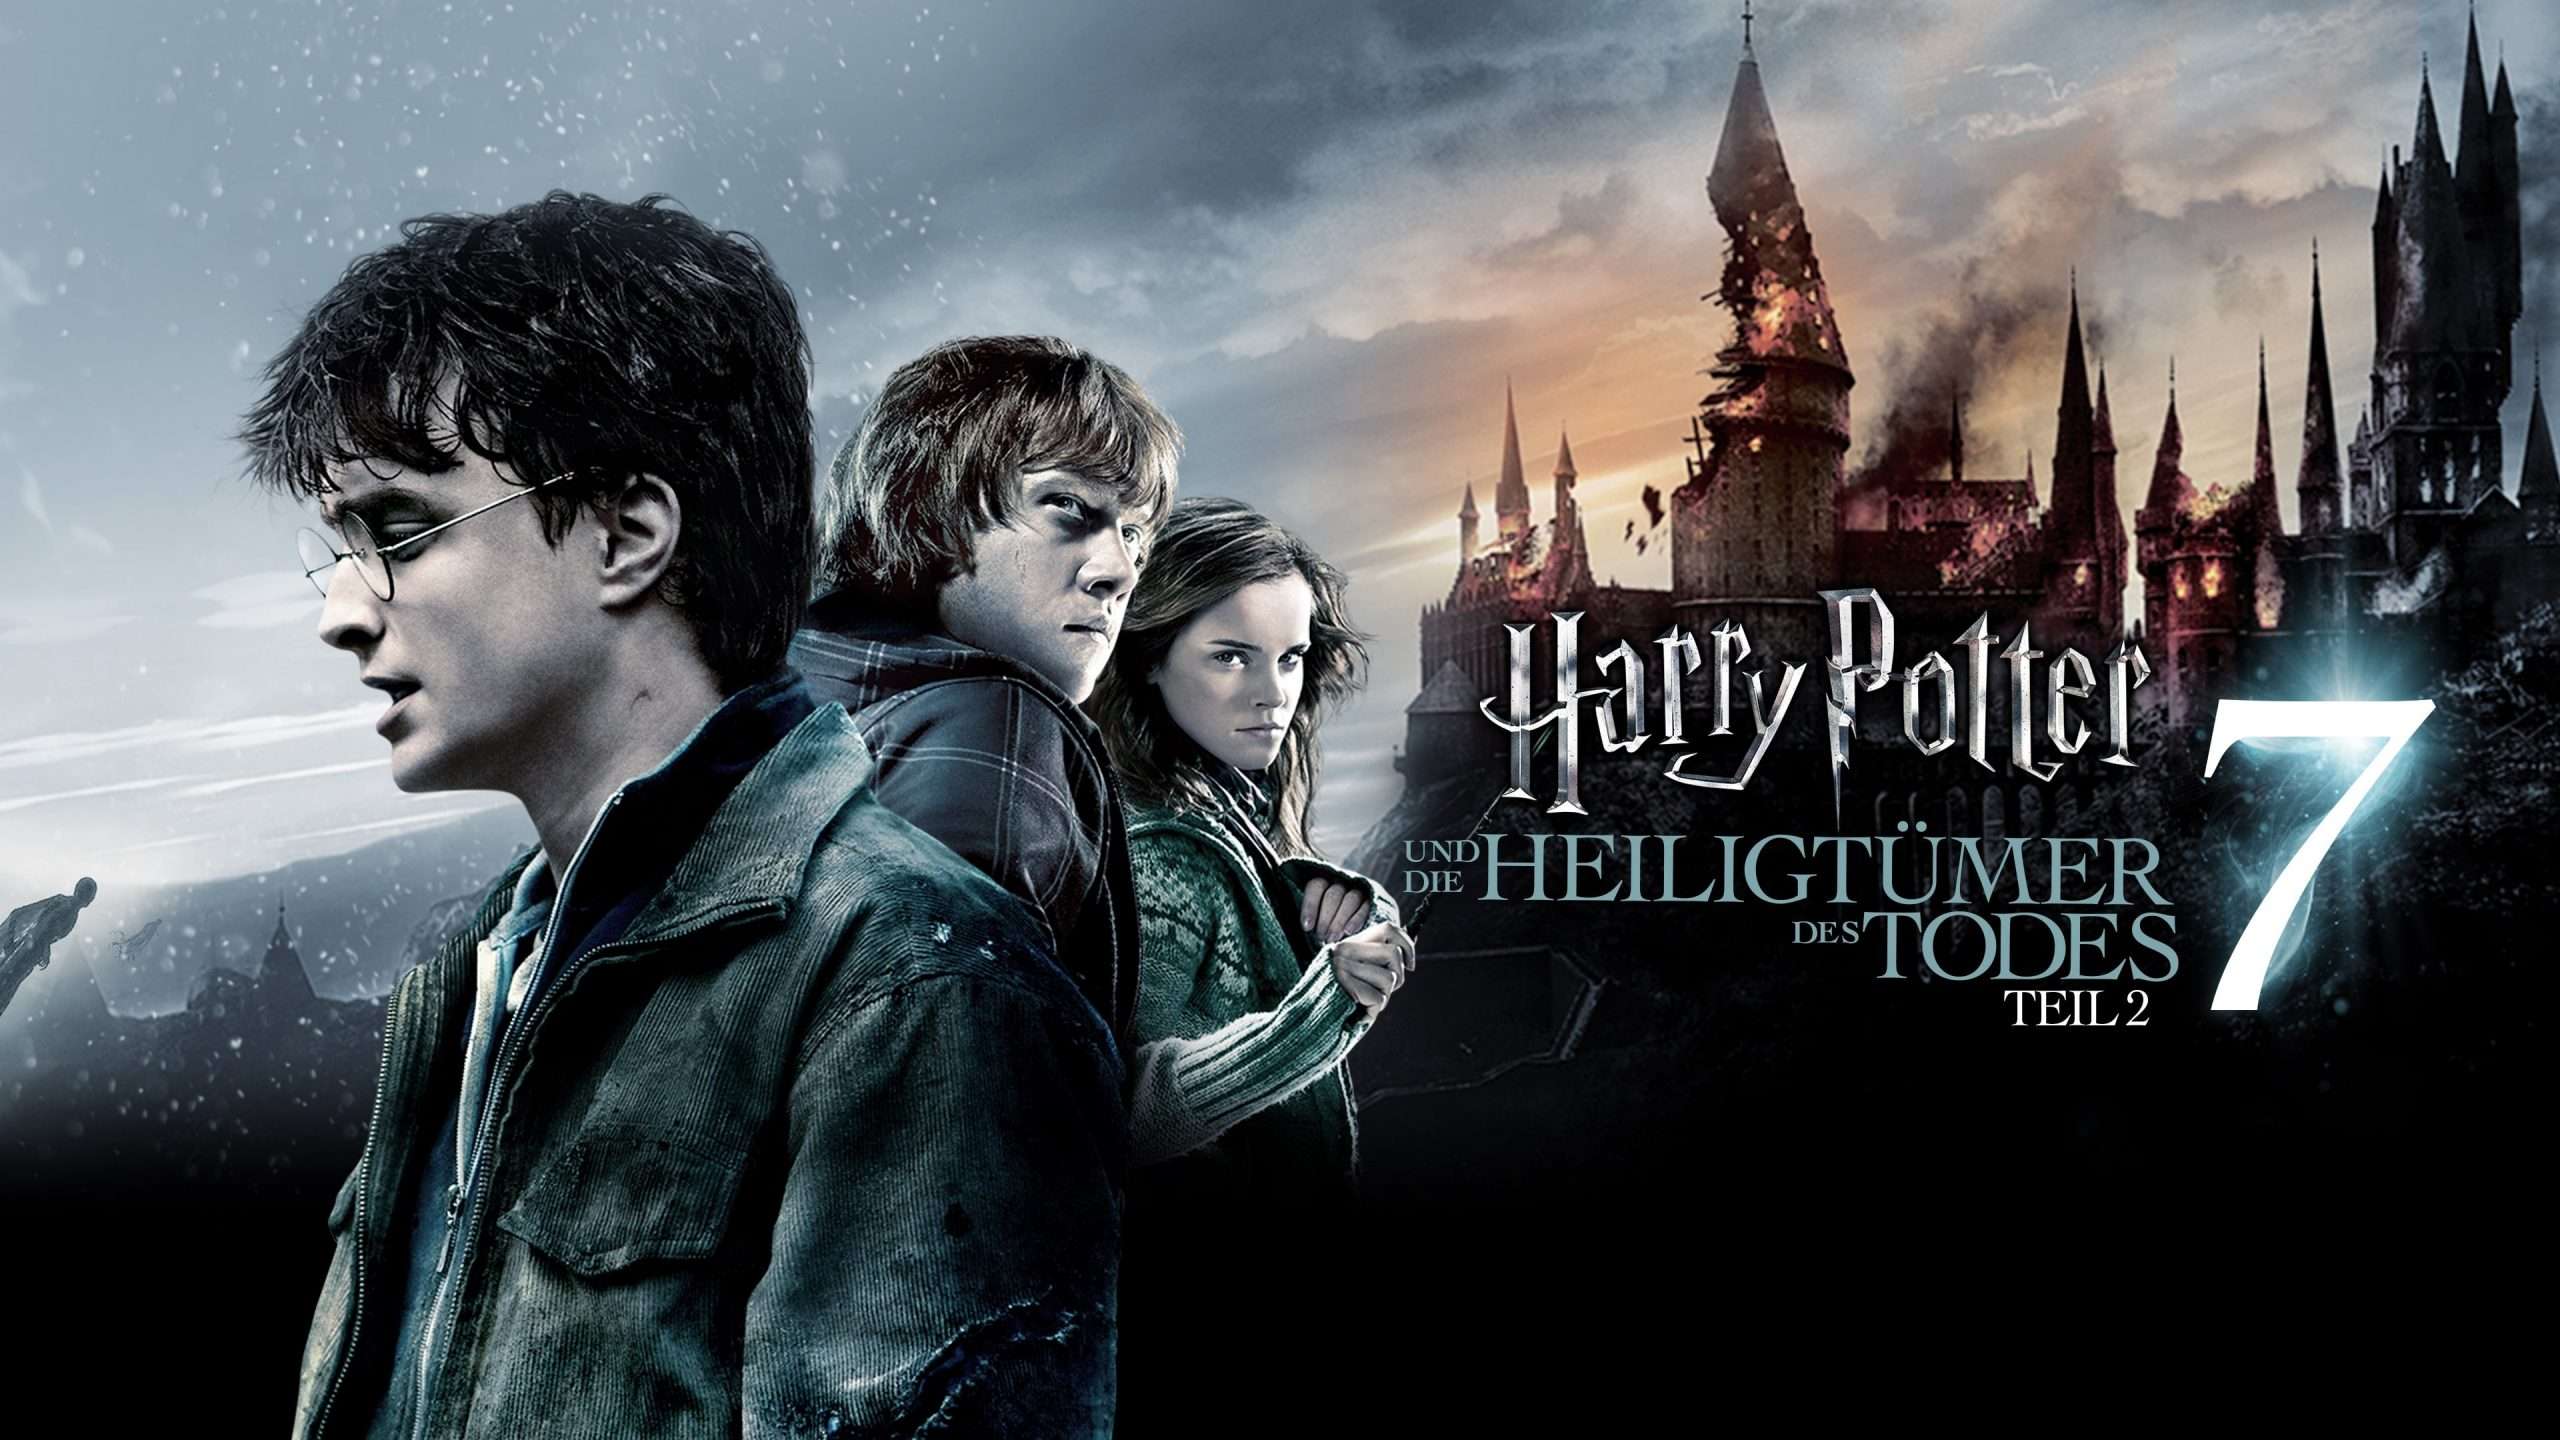 Watch Harry Potter and the Deathly Hallows: Part 2 (2011) Full Movie